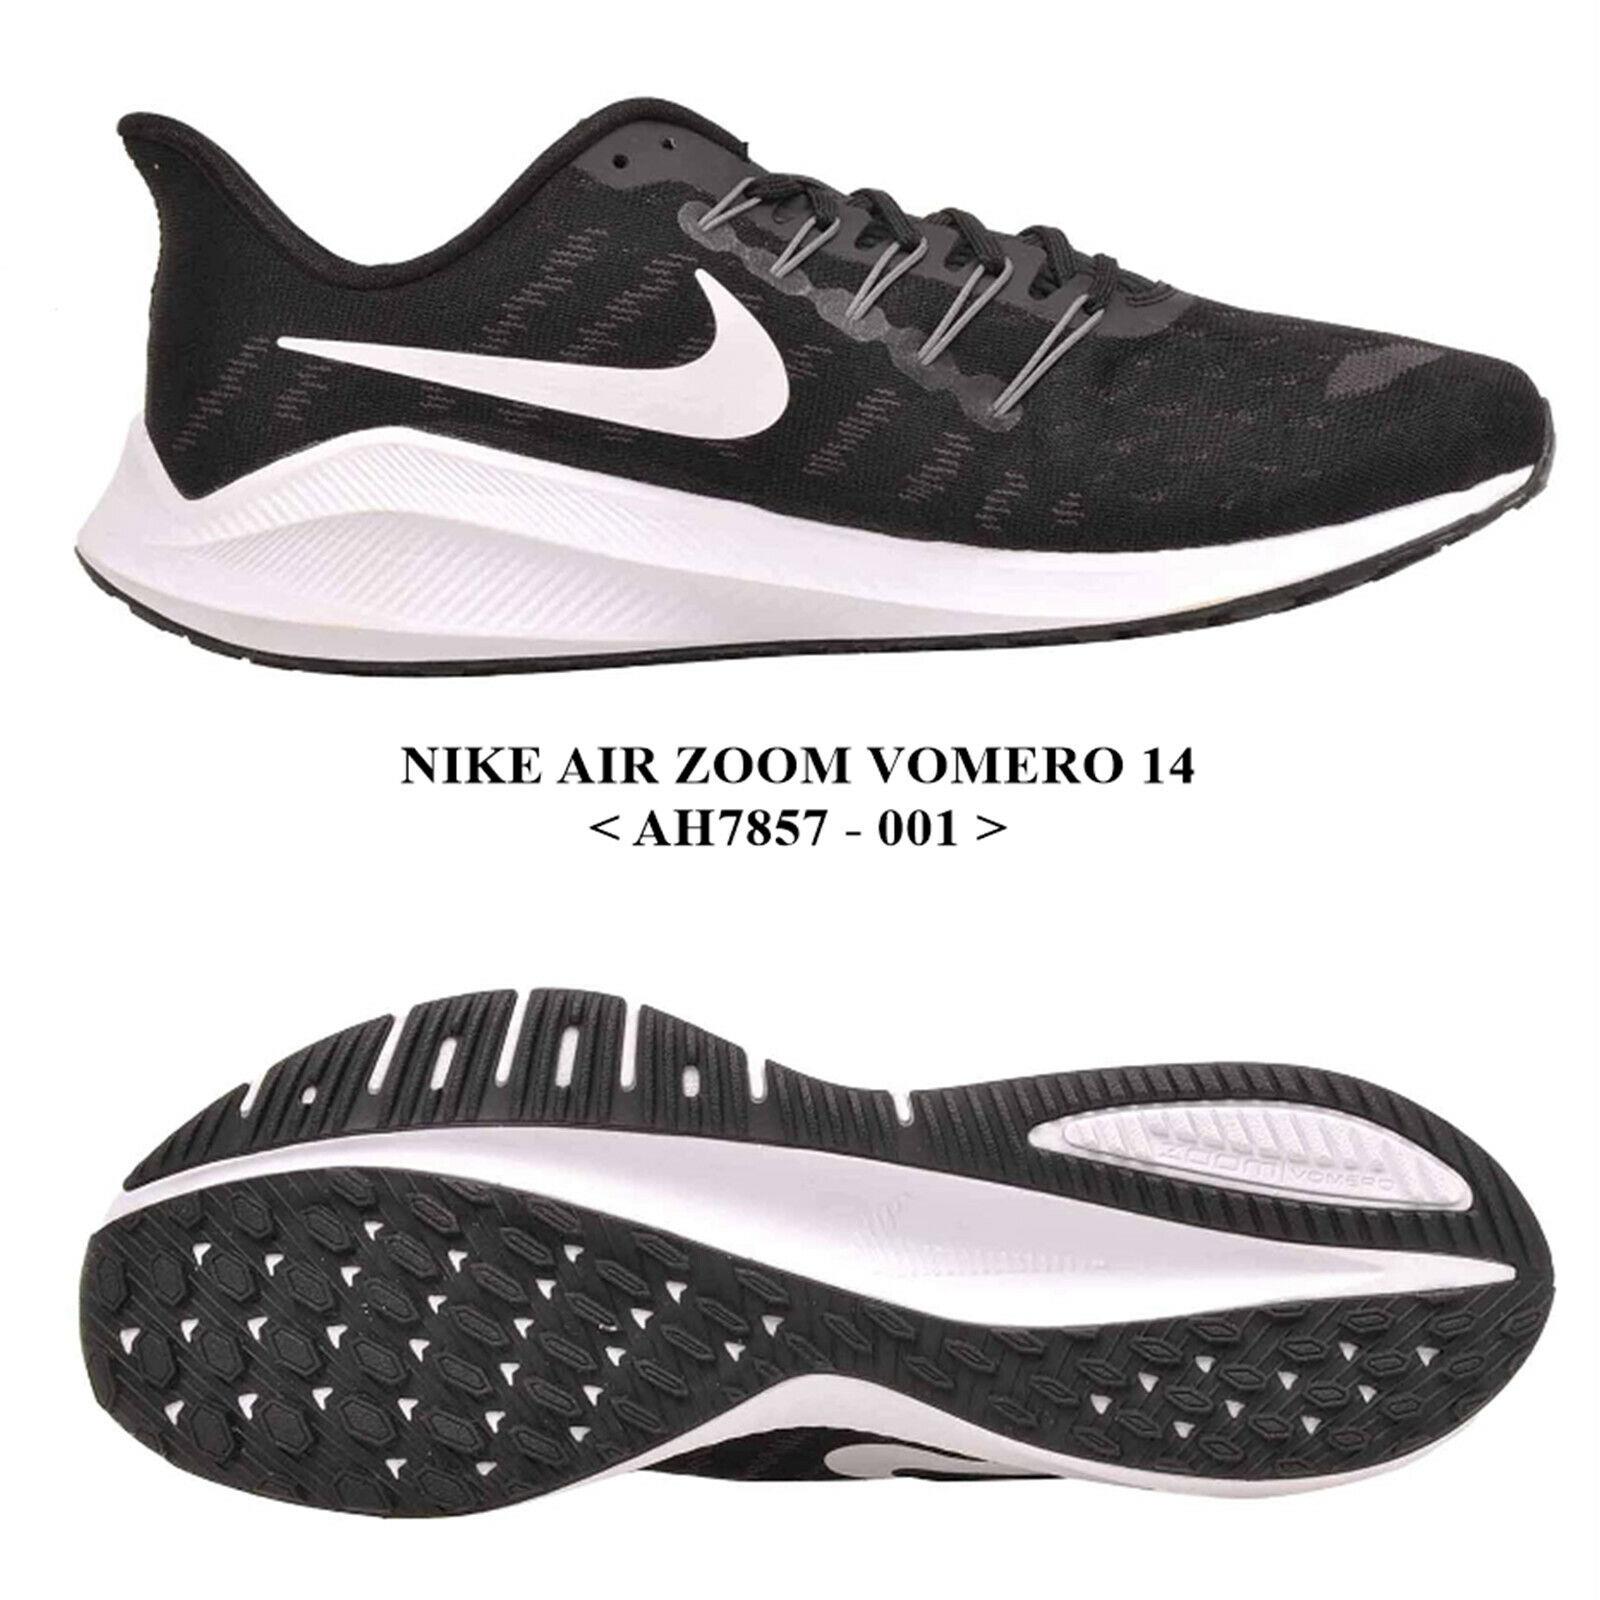 Nike Air Zoom Vomero 14 <AH7857 - 001> Men`s Running Shoes with Box